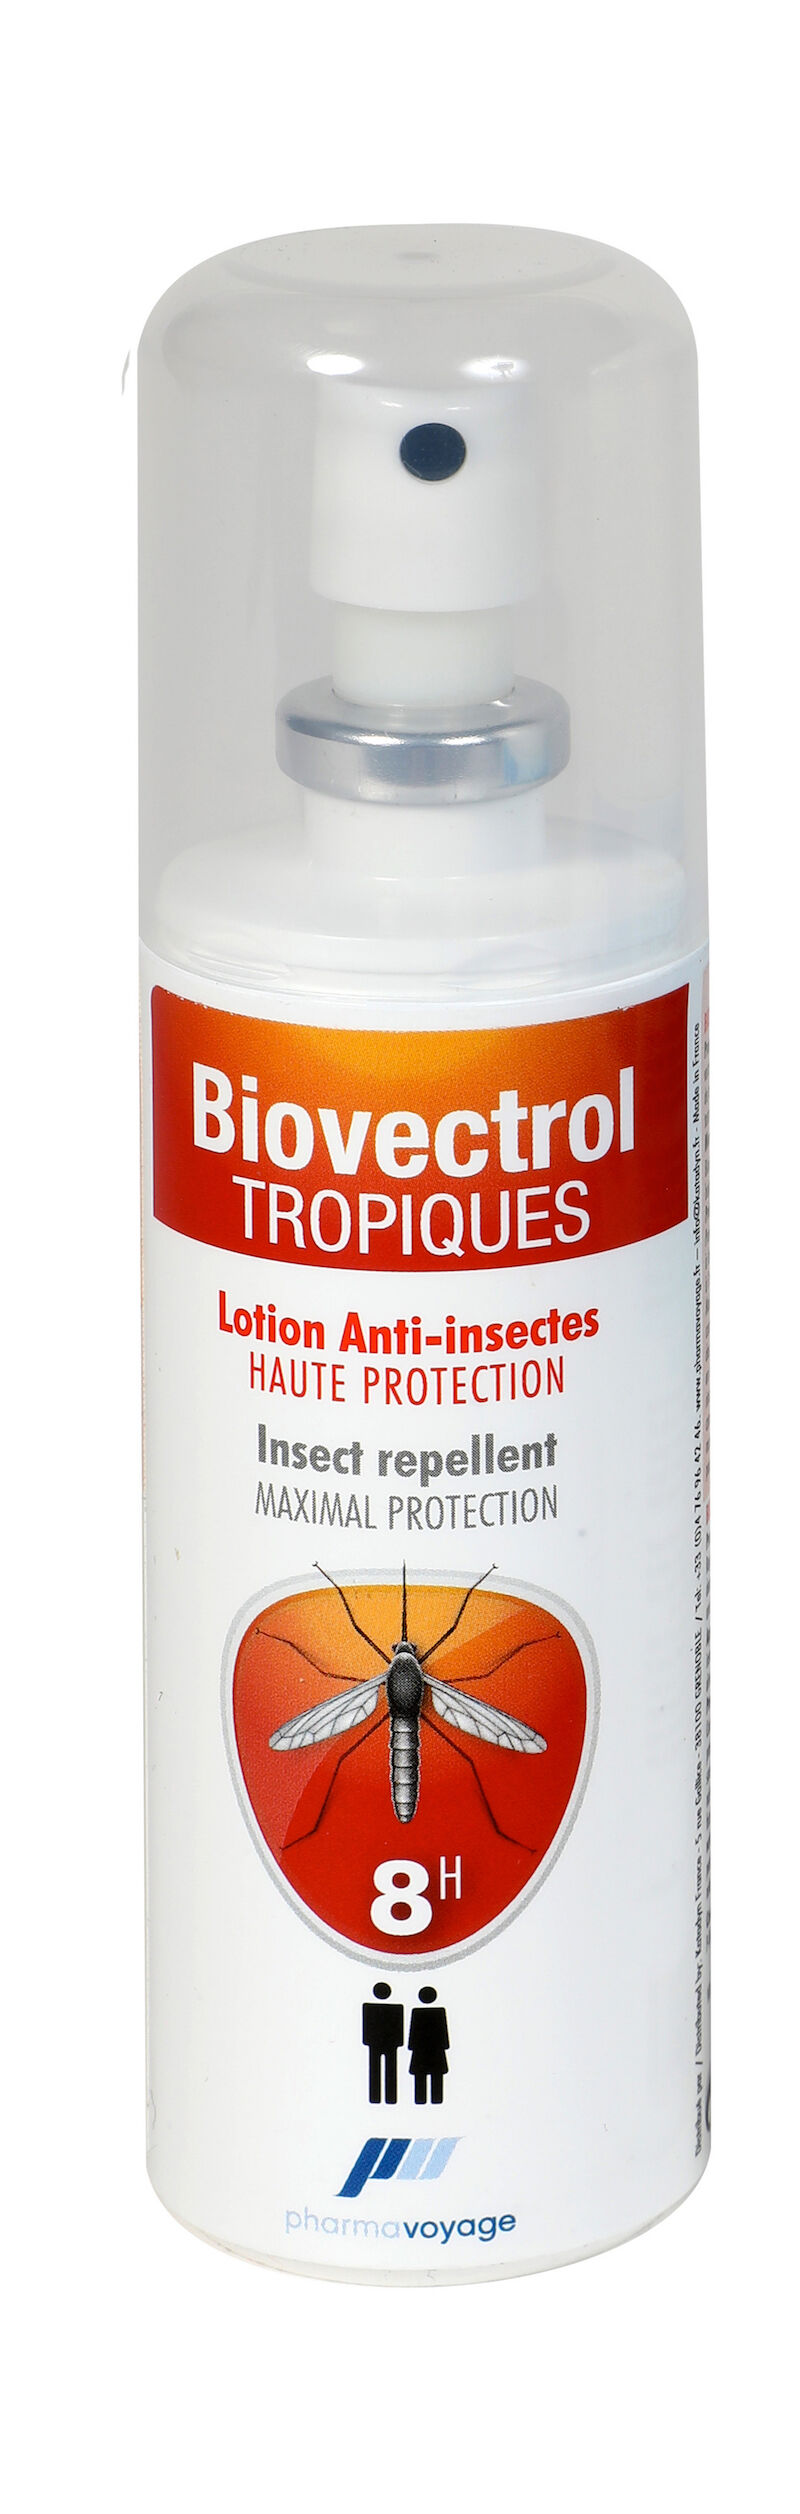 Pharmavoyage Biovectrol Tropiques - Insect repellent